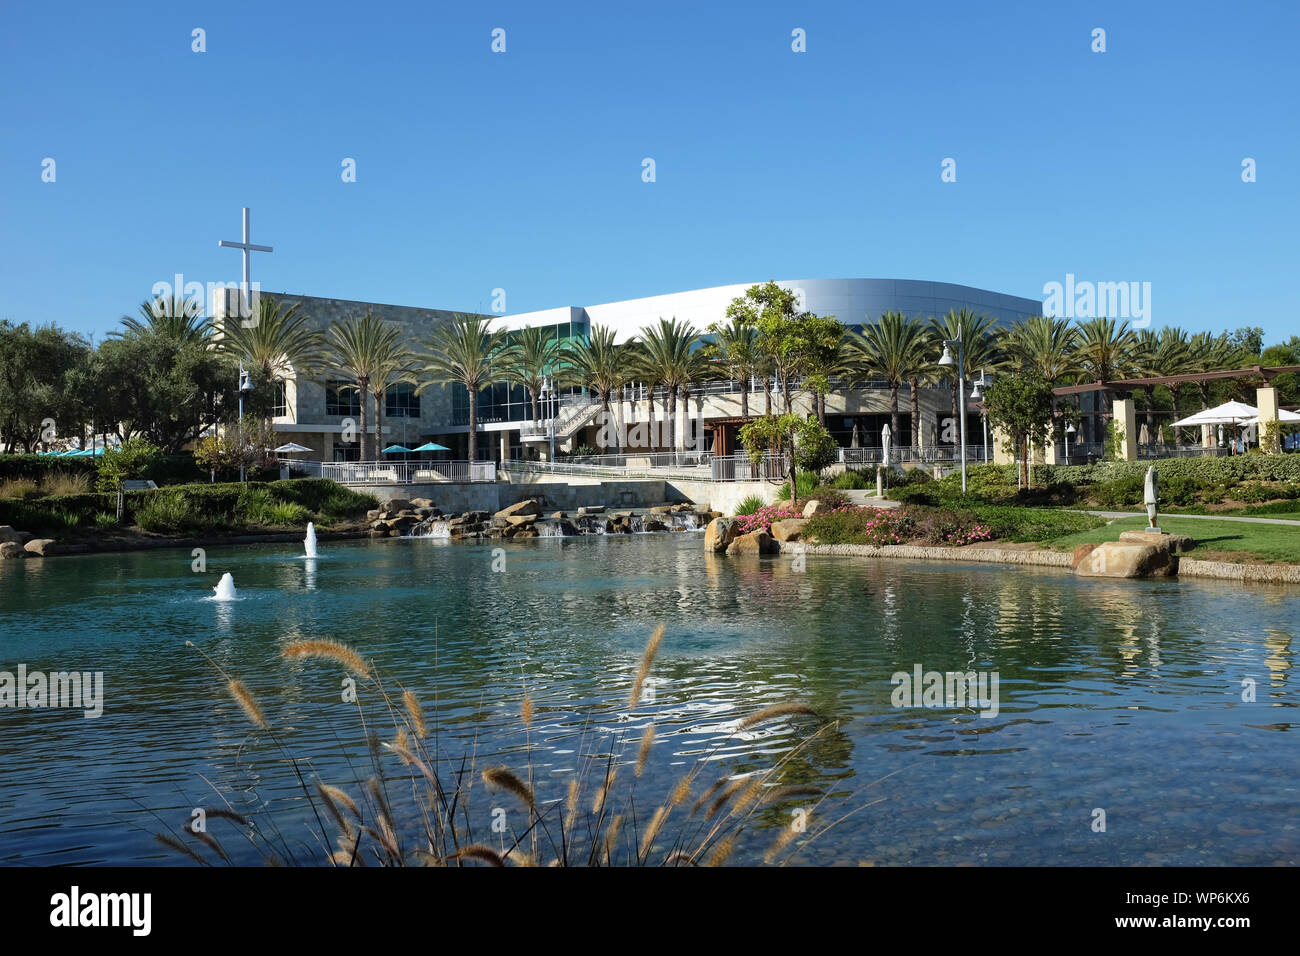 IRVINE, CALIFORNIA - SEPT 7, 2019: Mariners Church Lake and Worship Center, a non-denominational, Christian Church located in central Orange County. Stock Photo